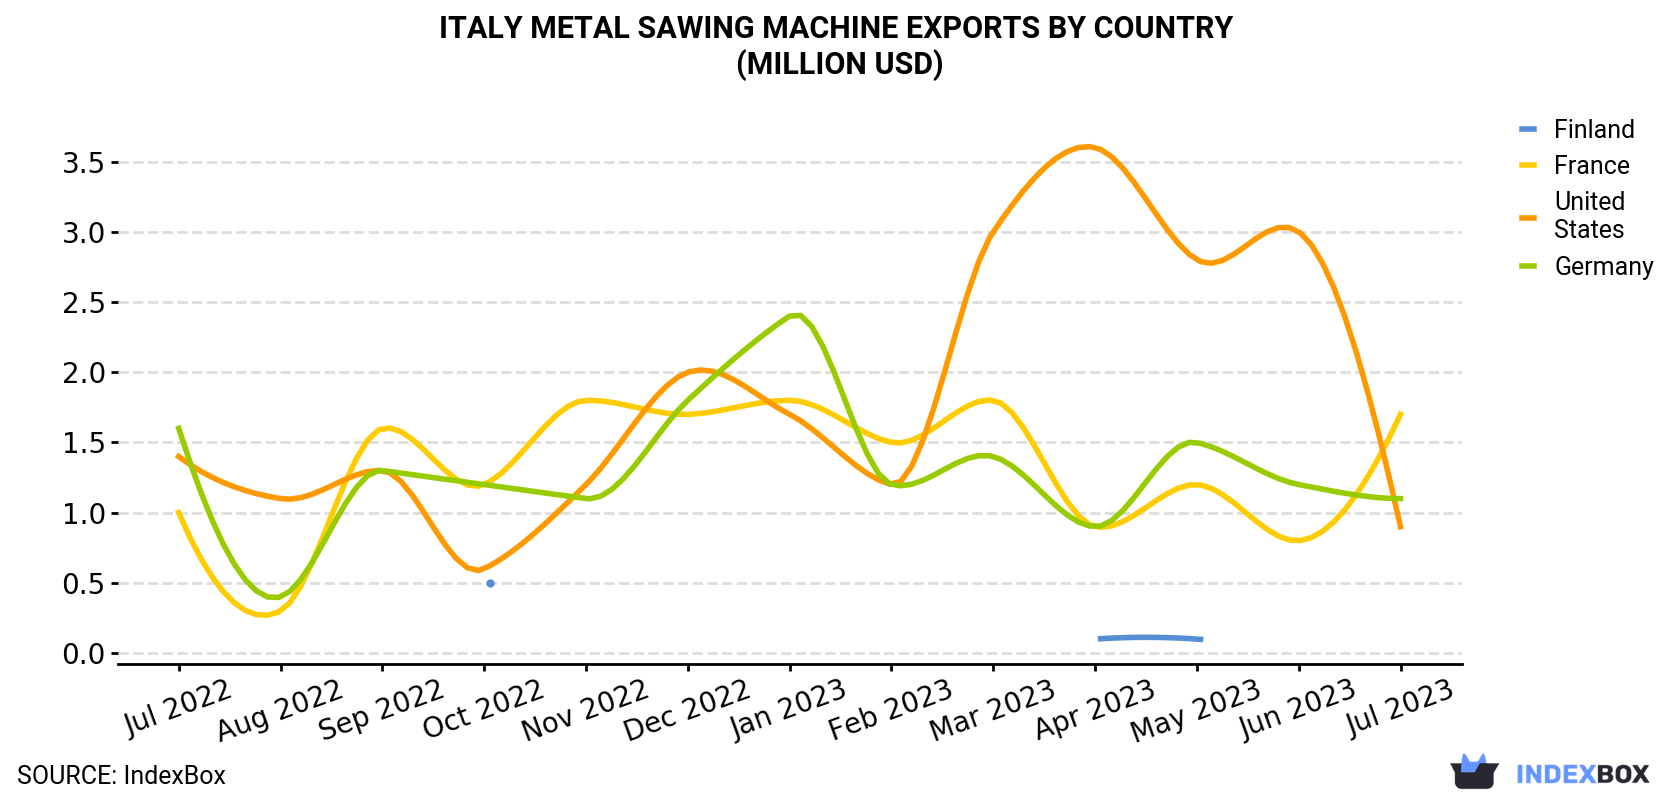 Italy Metal Sawing Machine Exports By Country (Million USD)